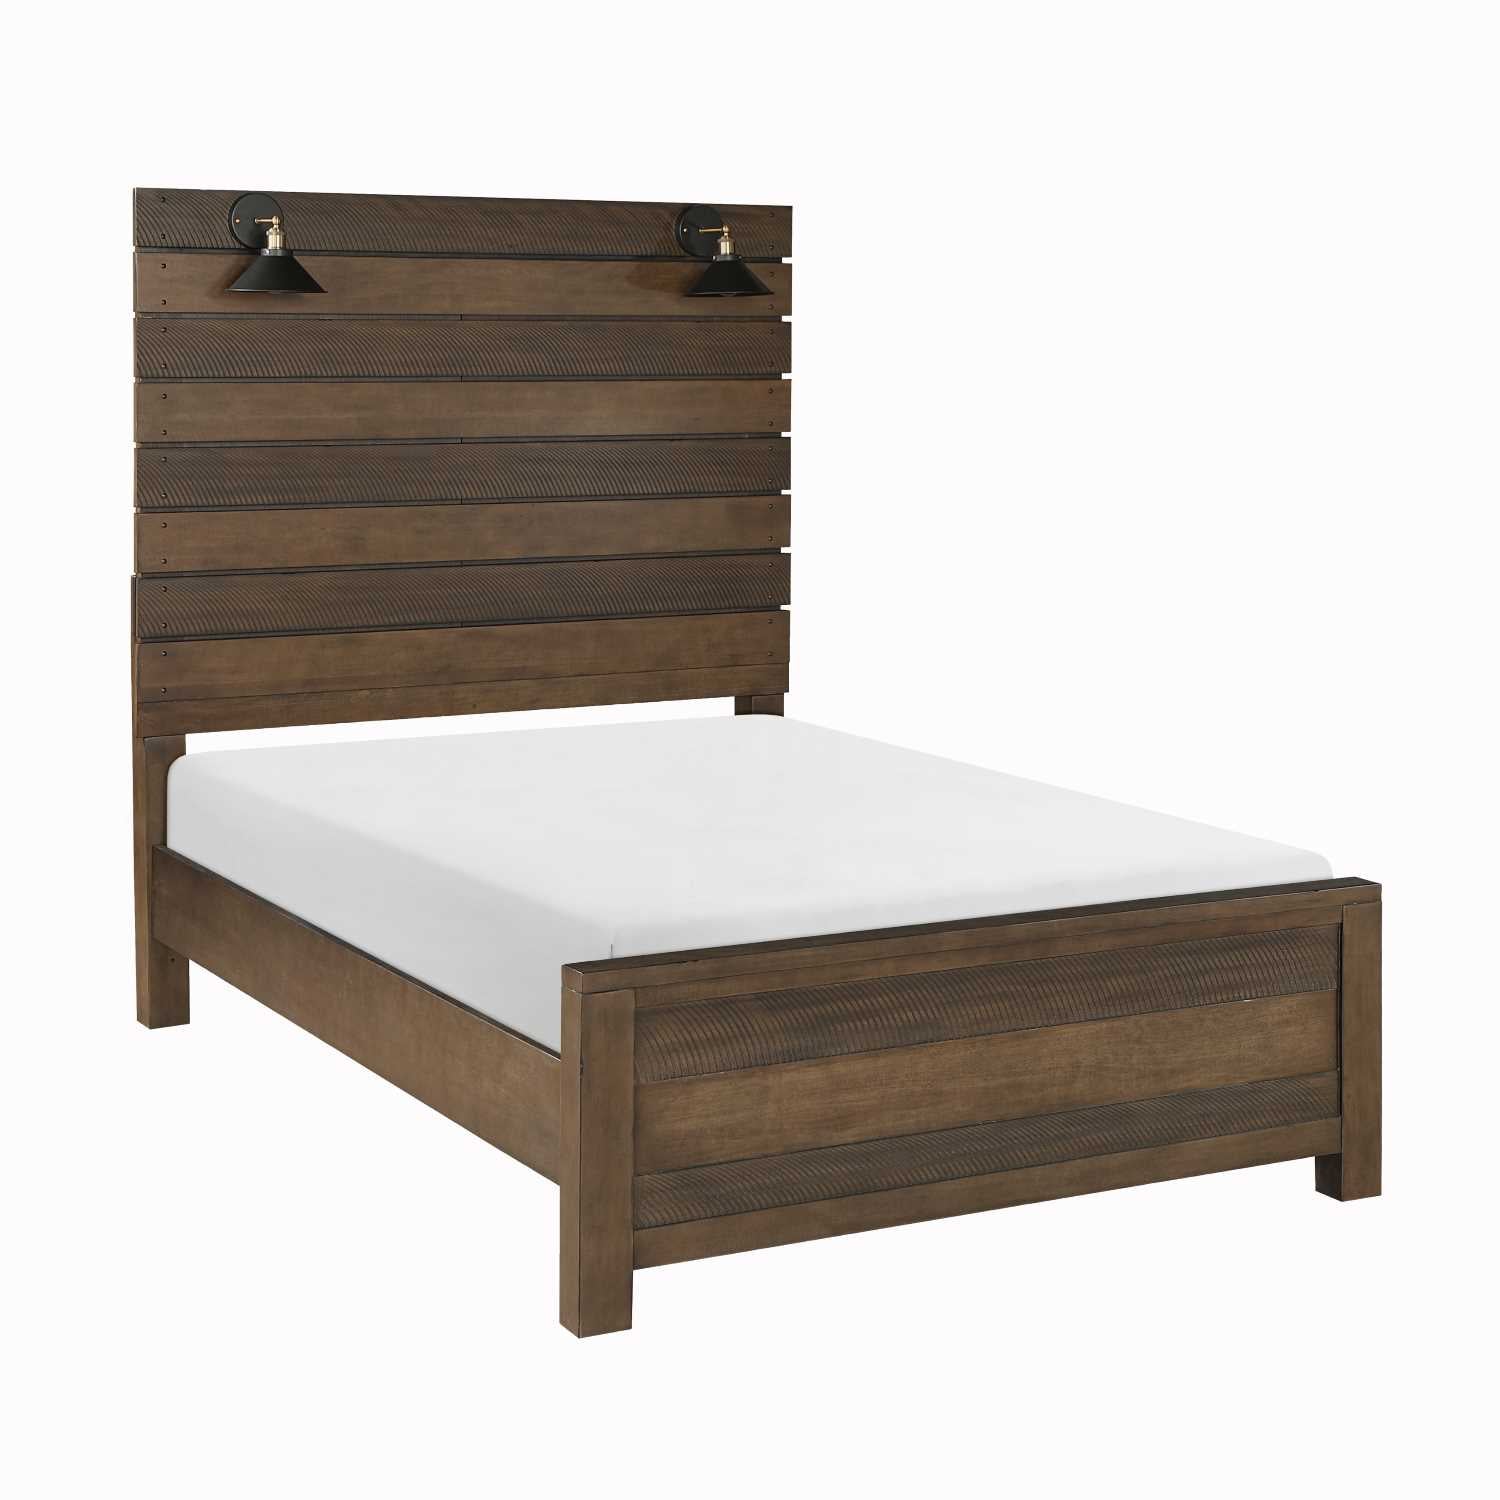 Conway Bedroom Collection 1497